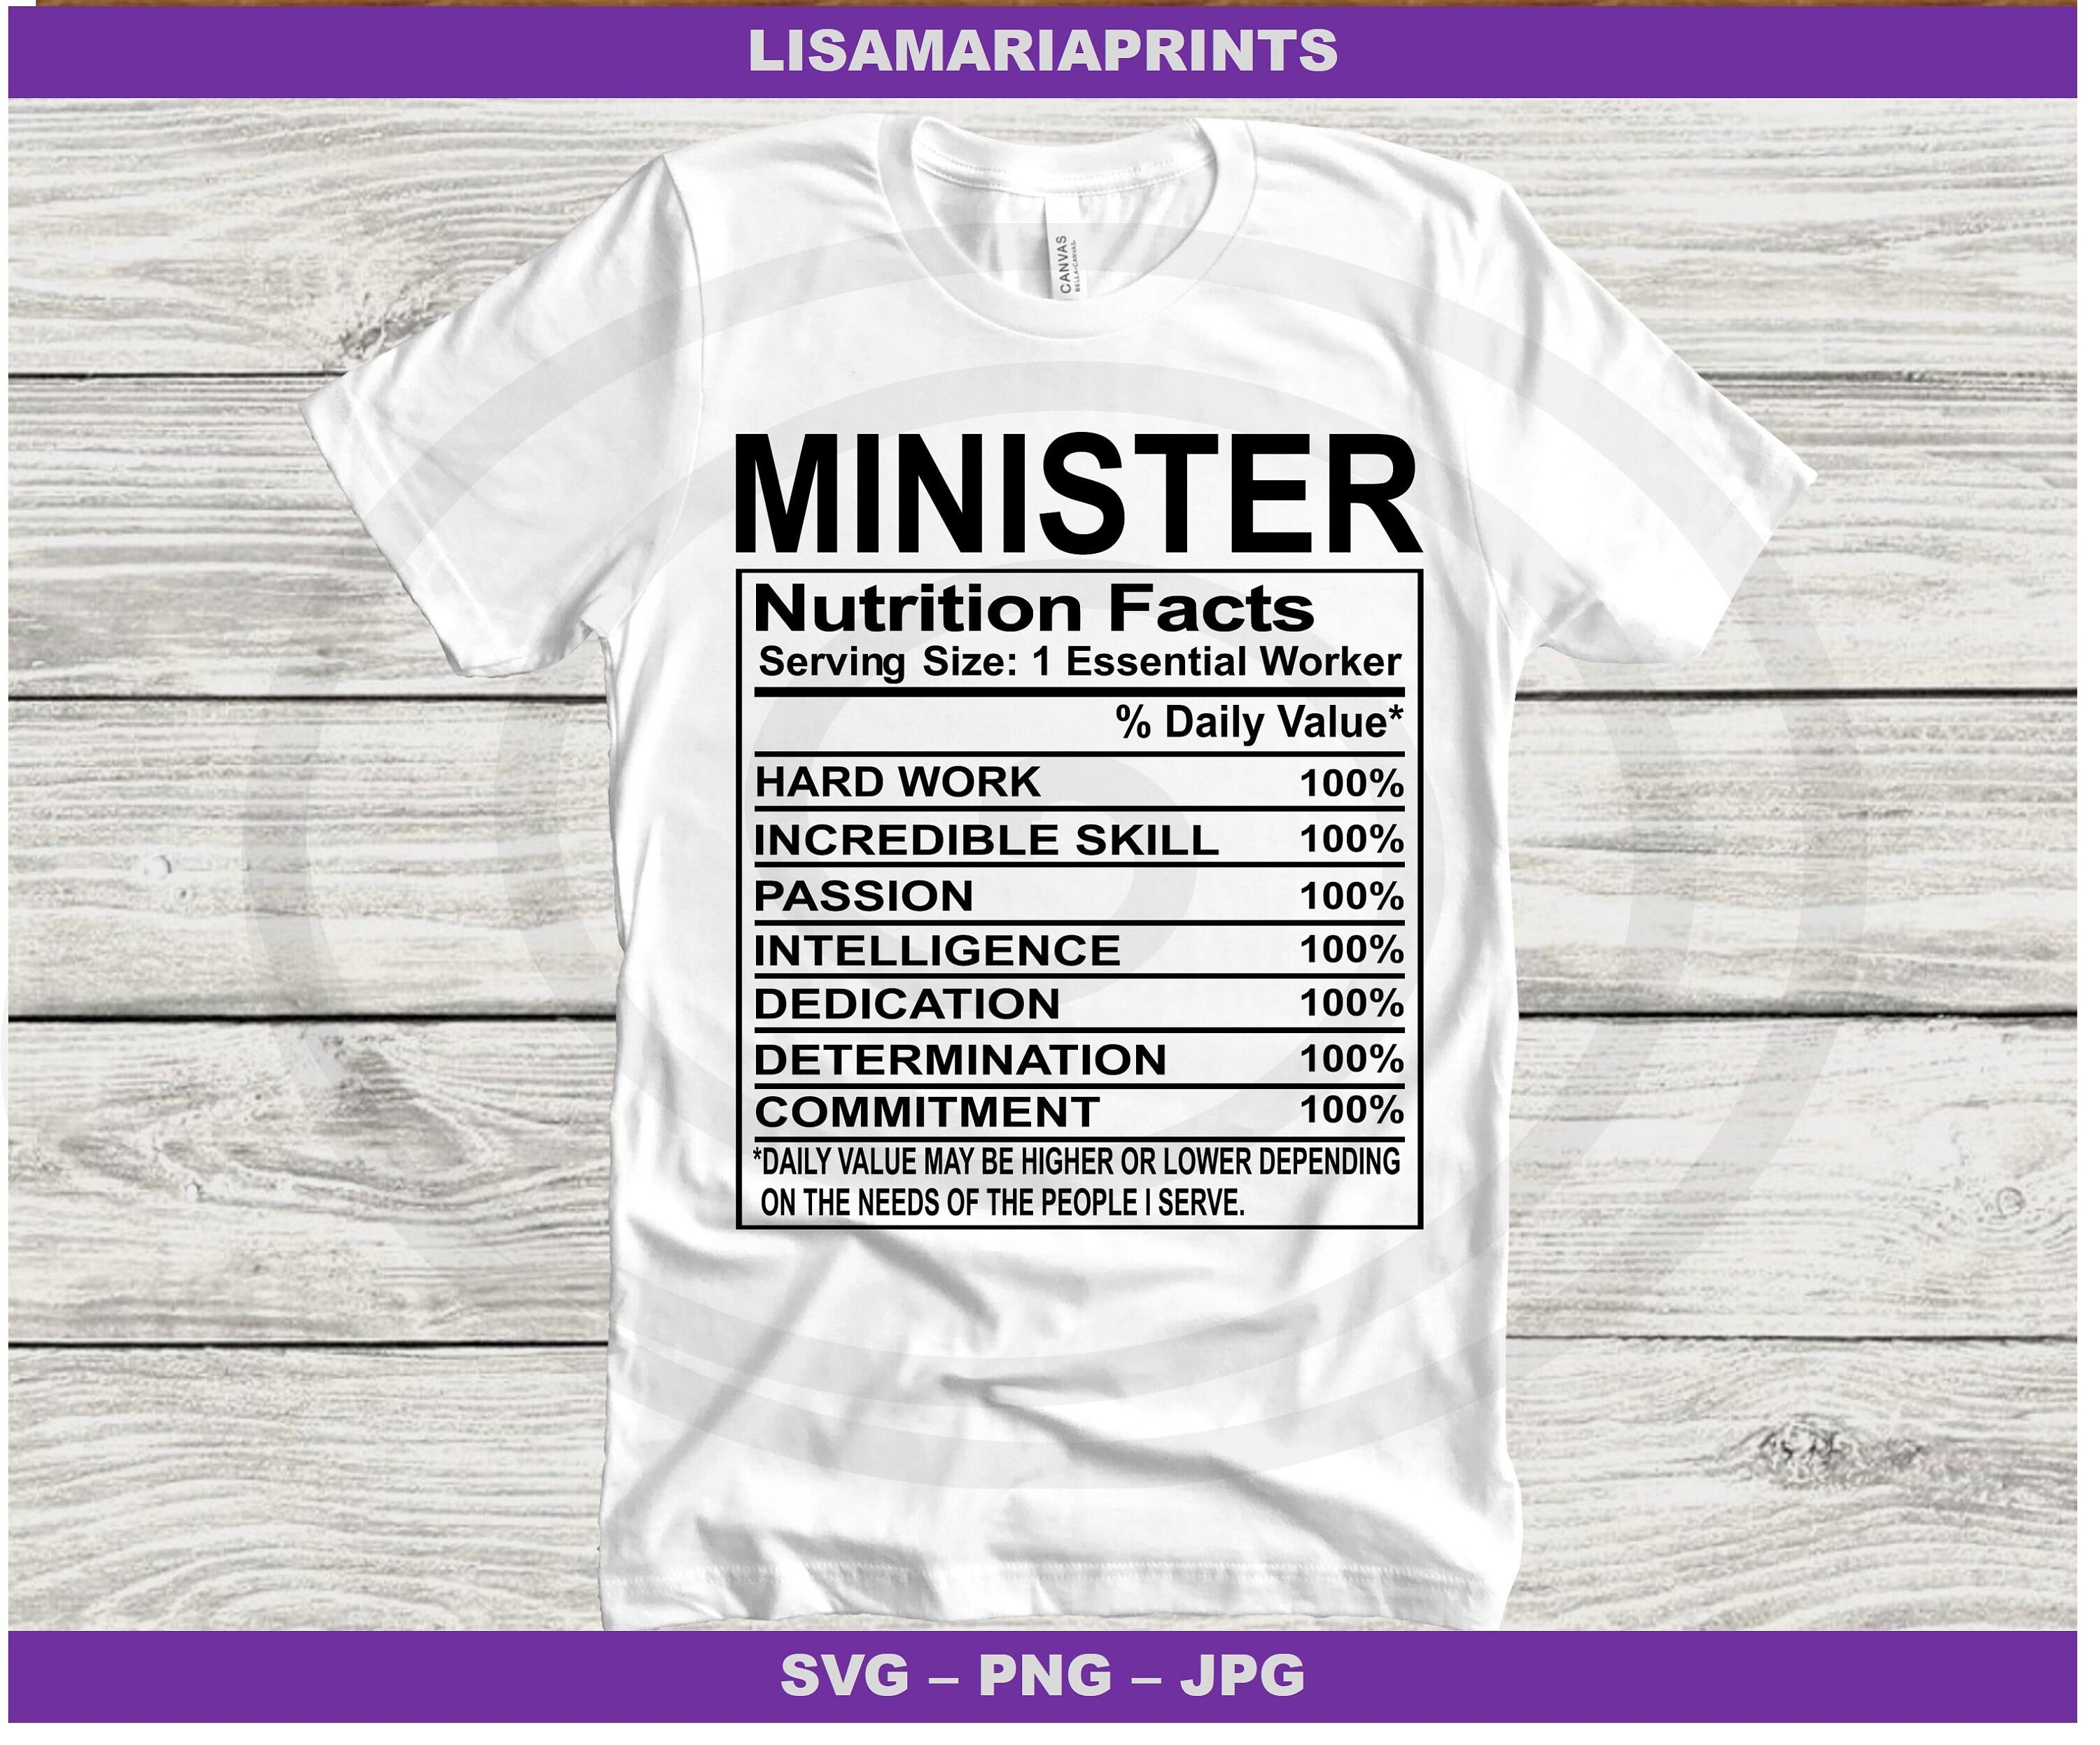 Minister Nutrition Facts  SVG JPG Png Dxf - Instant Digital Download - No Physical Product Will Be Sent